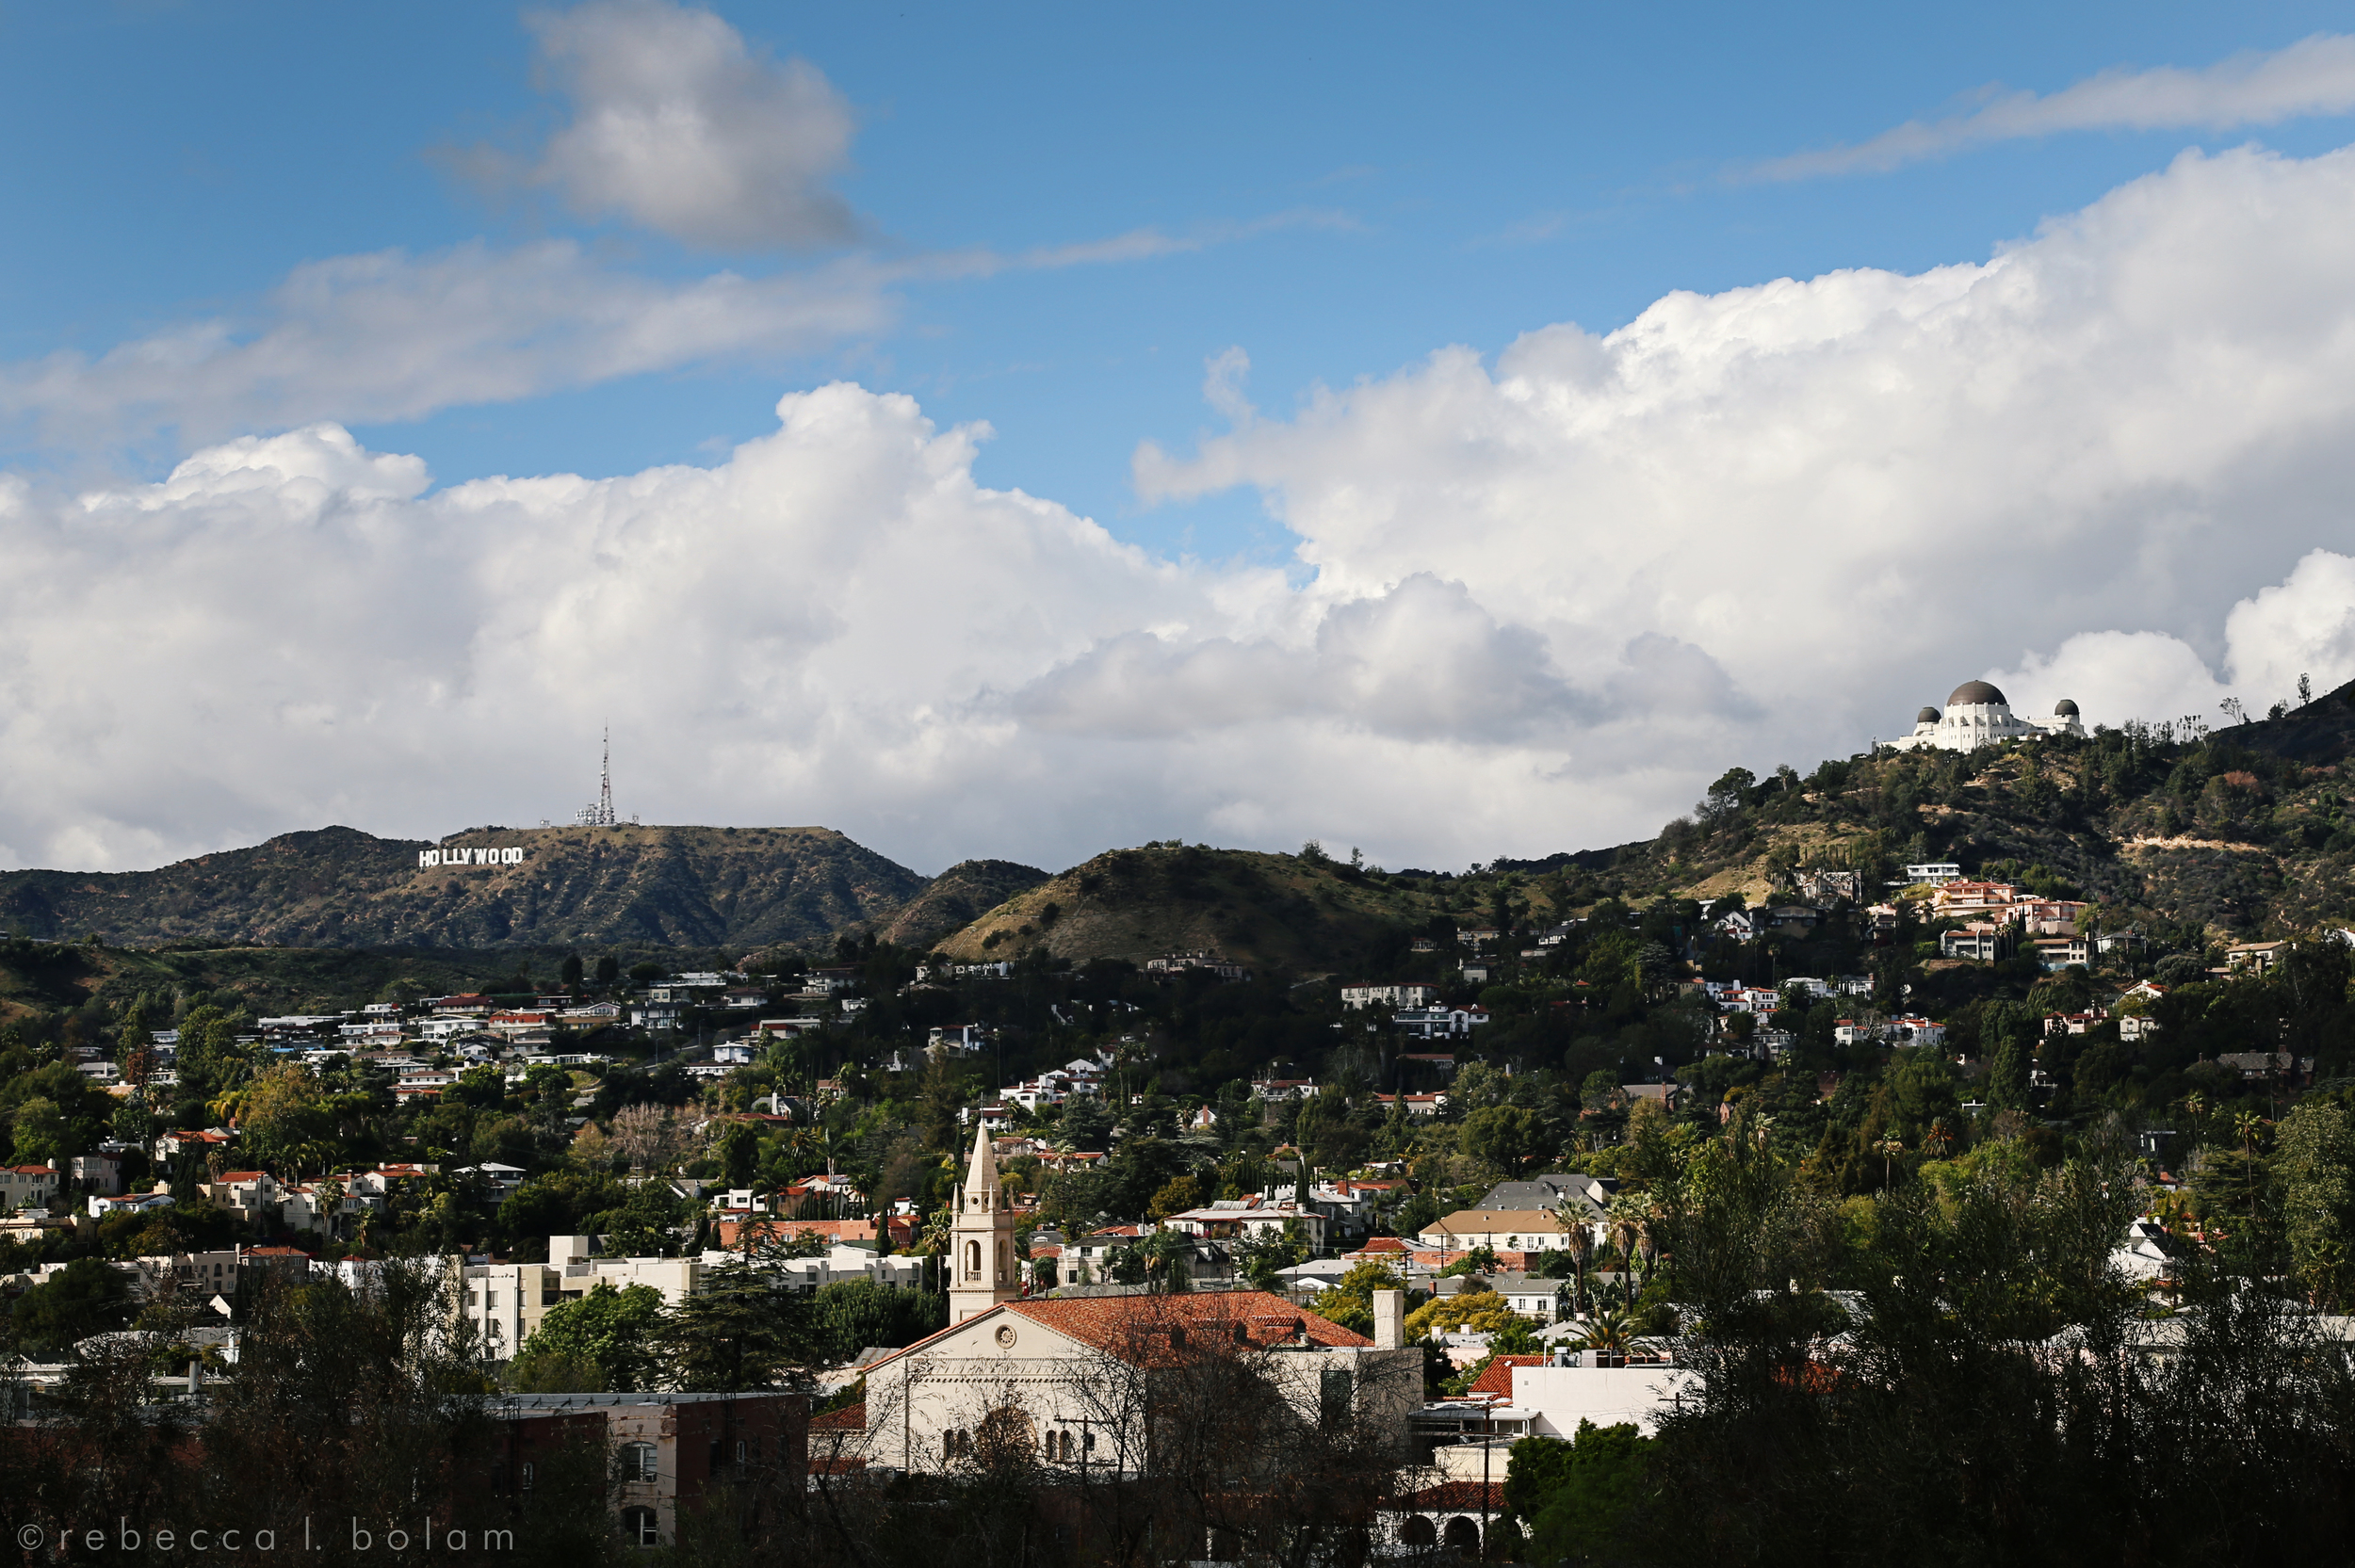 Griffith observatory and hollywood sign from barnsdall park.jpg